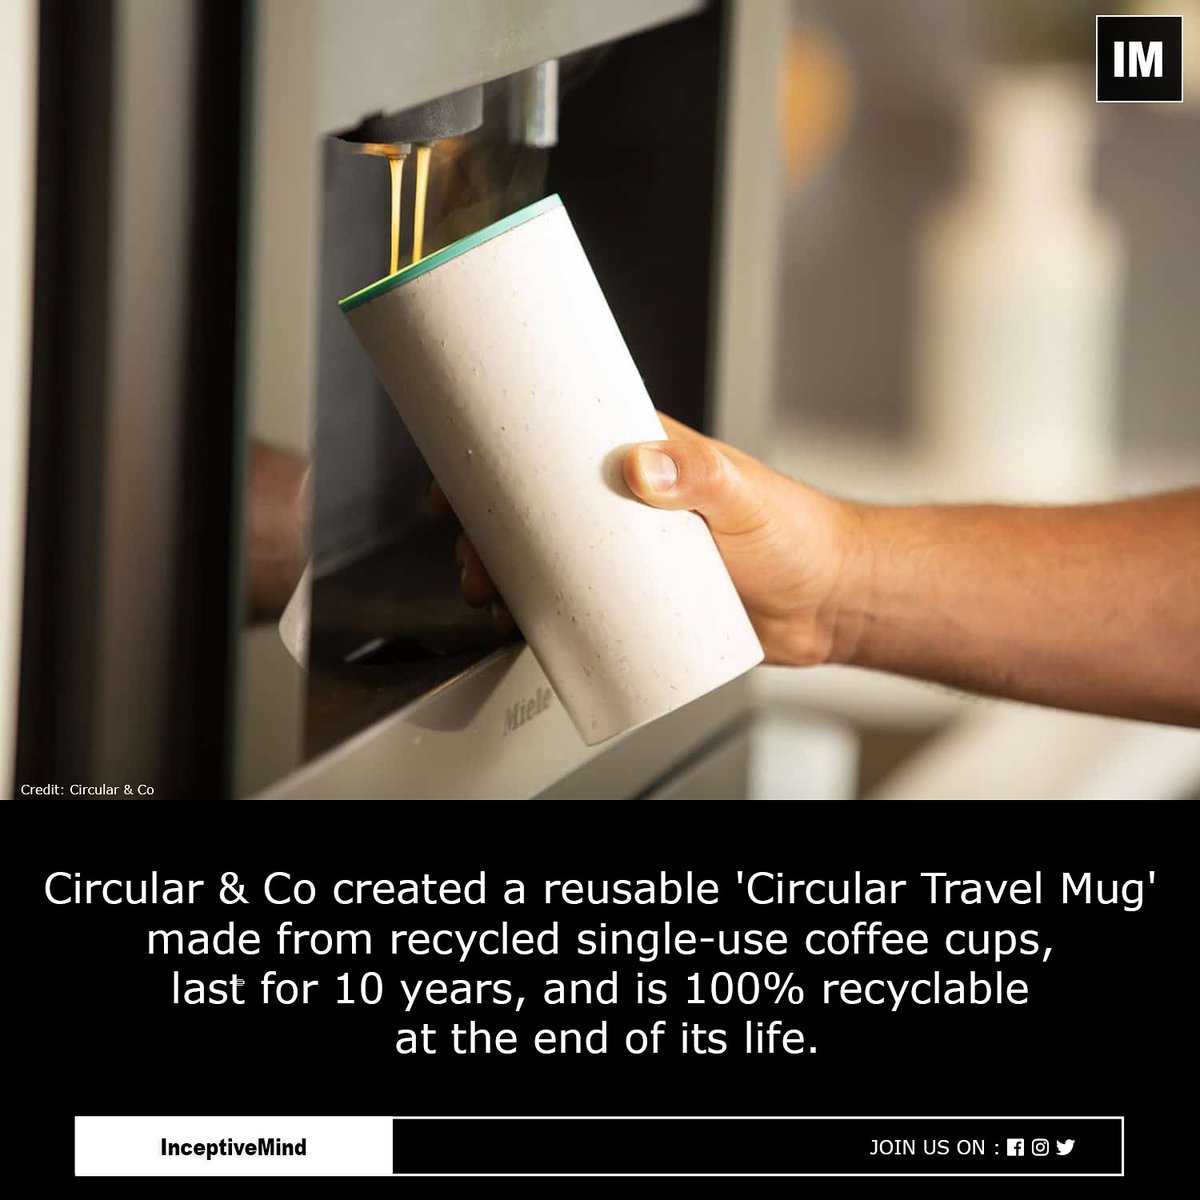 A reusable, recyclable Circular Cup made from single-use coffee cups.
#circularcup #coffeecups #reusables #recyclable #inceptivemind